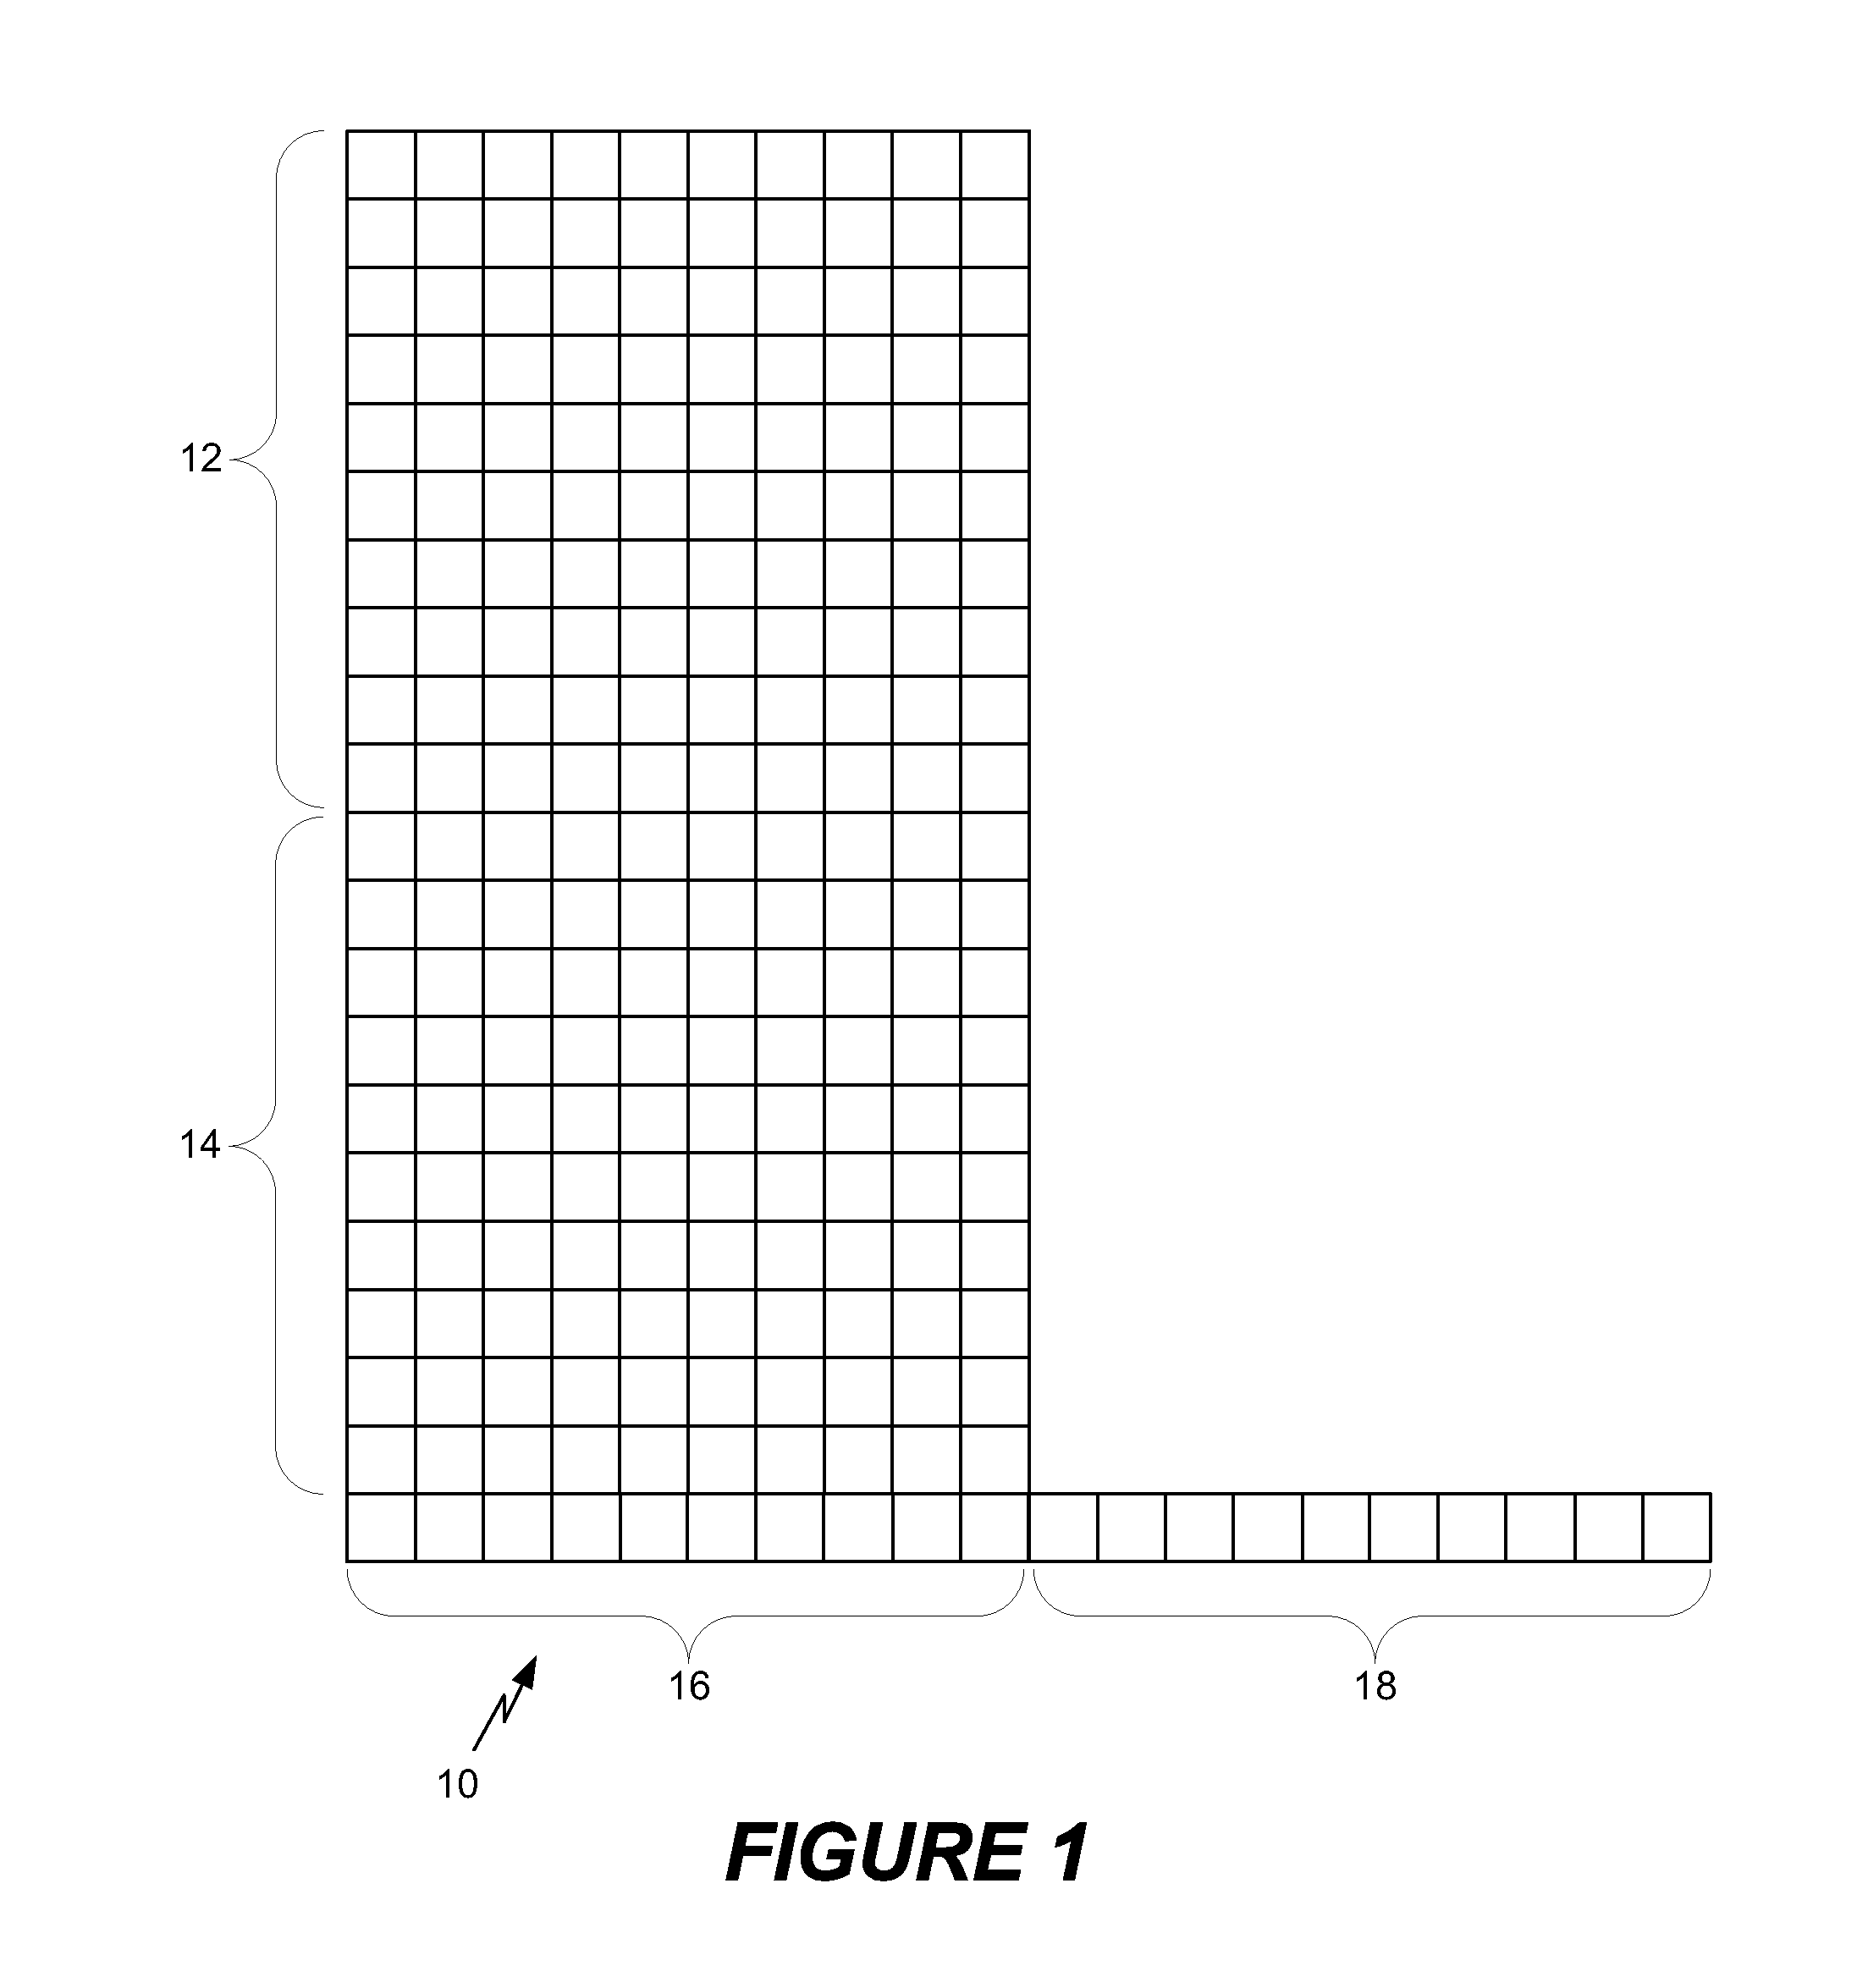 Apparatus and method for low noise imaging